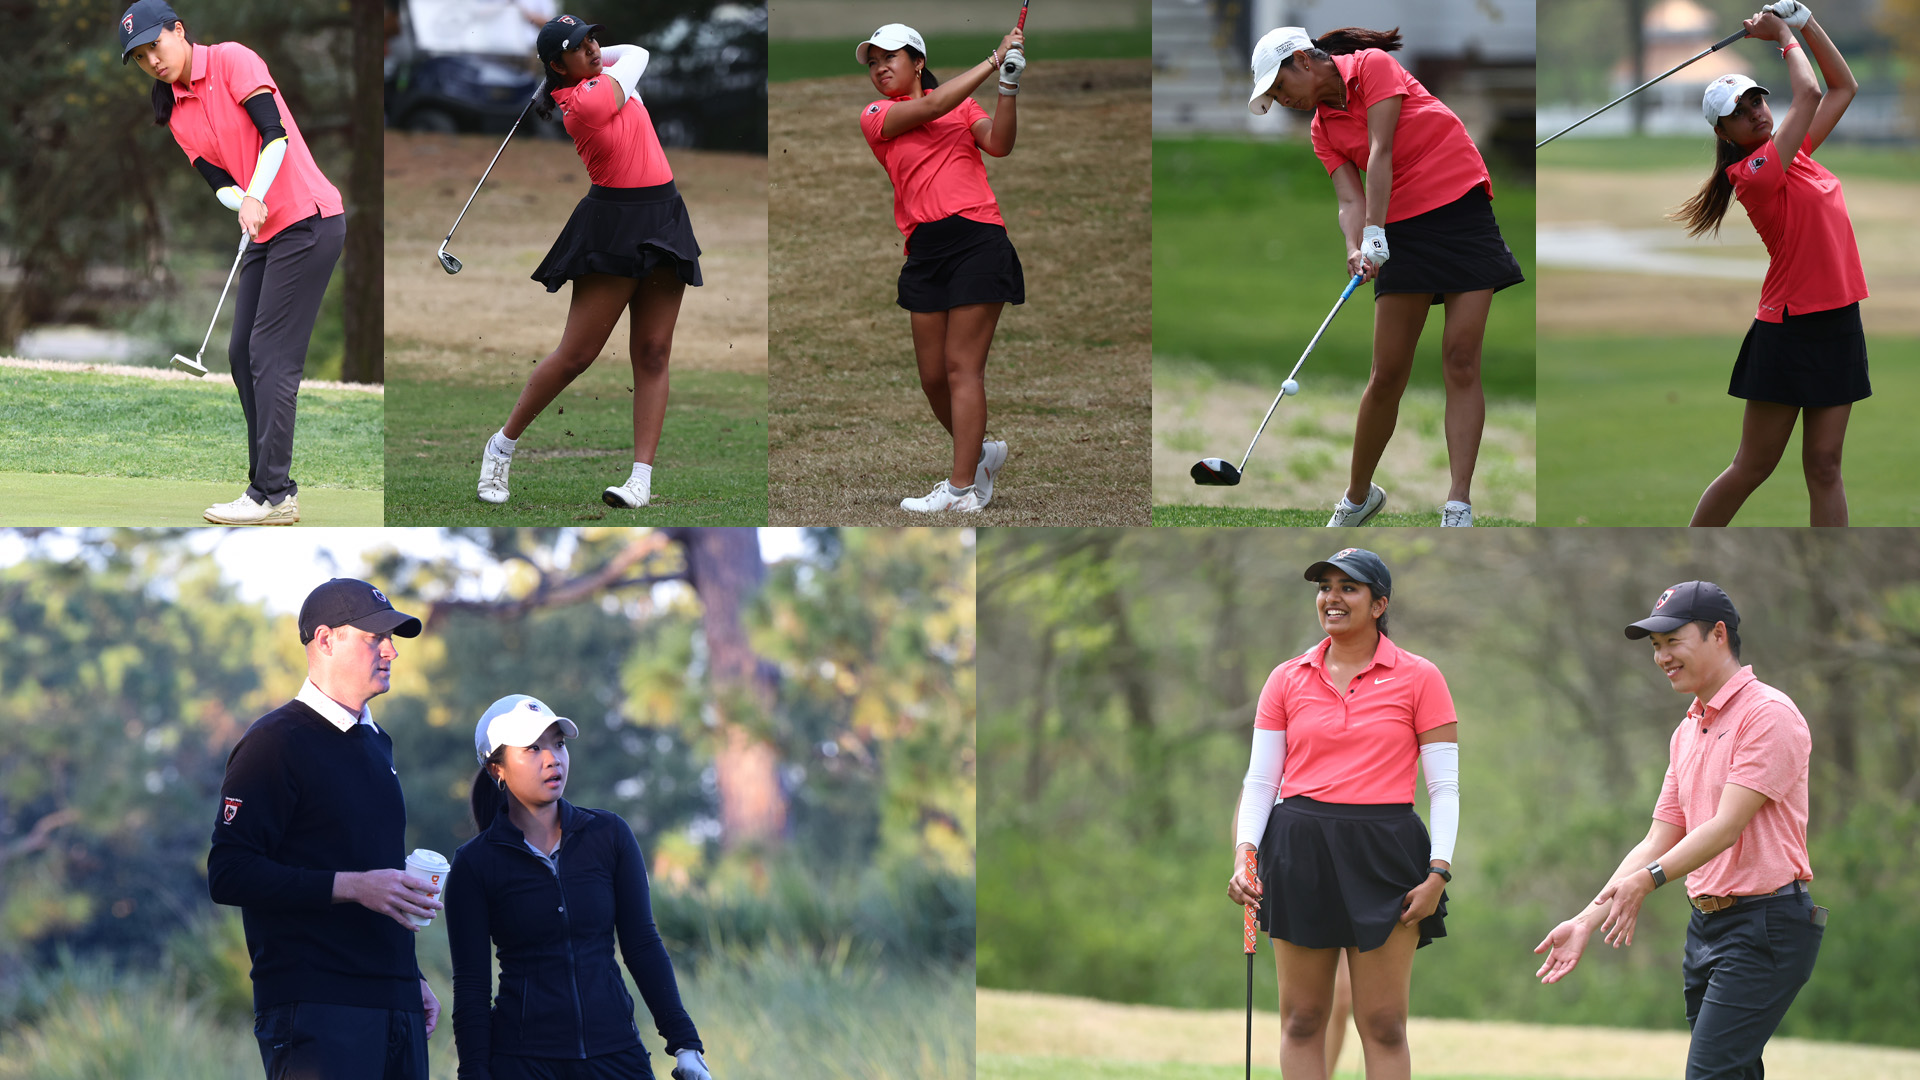 five women's golf action photos evenly spaced along the top with two photos of coaches talking to players on bottom half